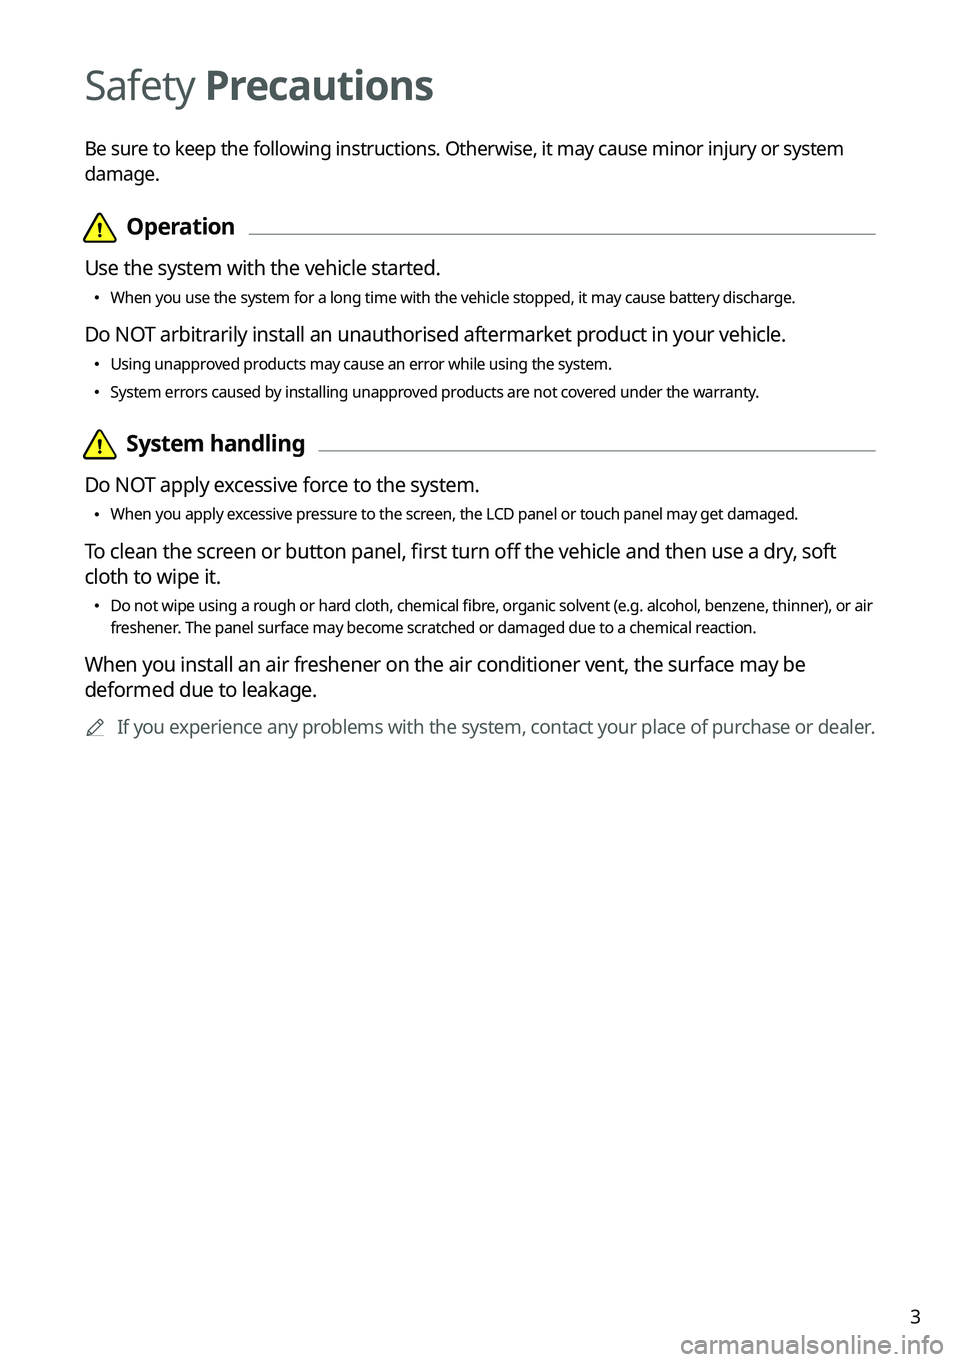 KIA NIRO PHEV 2023  Navigation System Quick Reference Guide 3
Safety Precautions
Be sure to keep the following instructions. Otherwise, it may cause minor injury or system 
damage. 
  